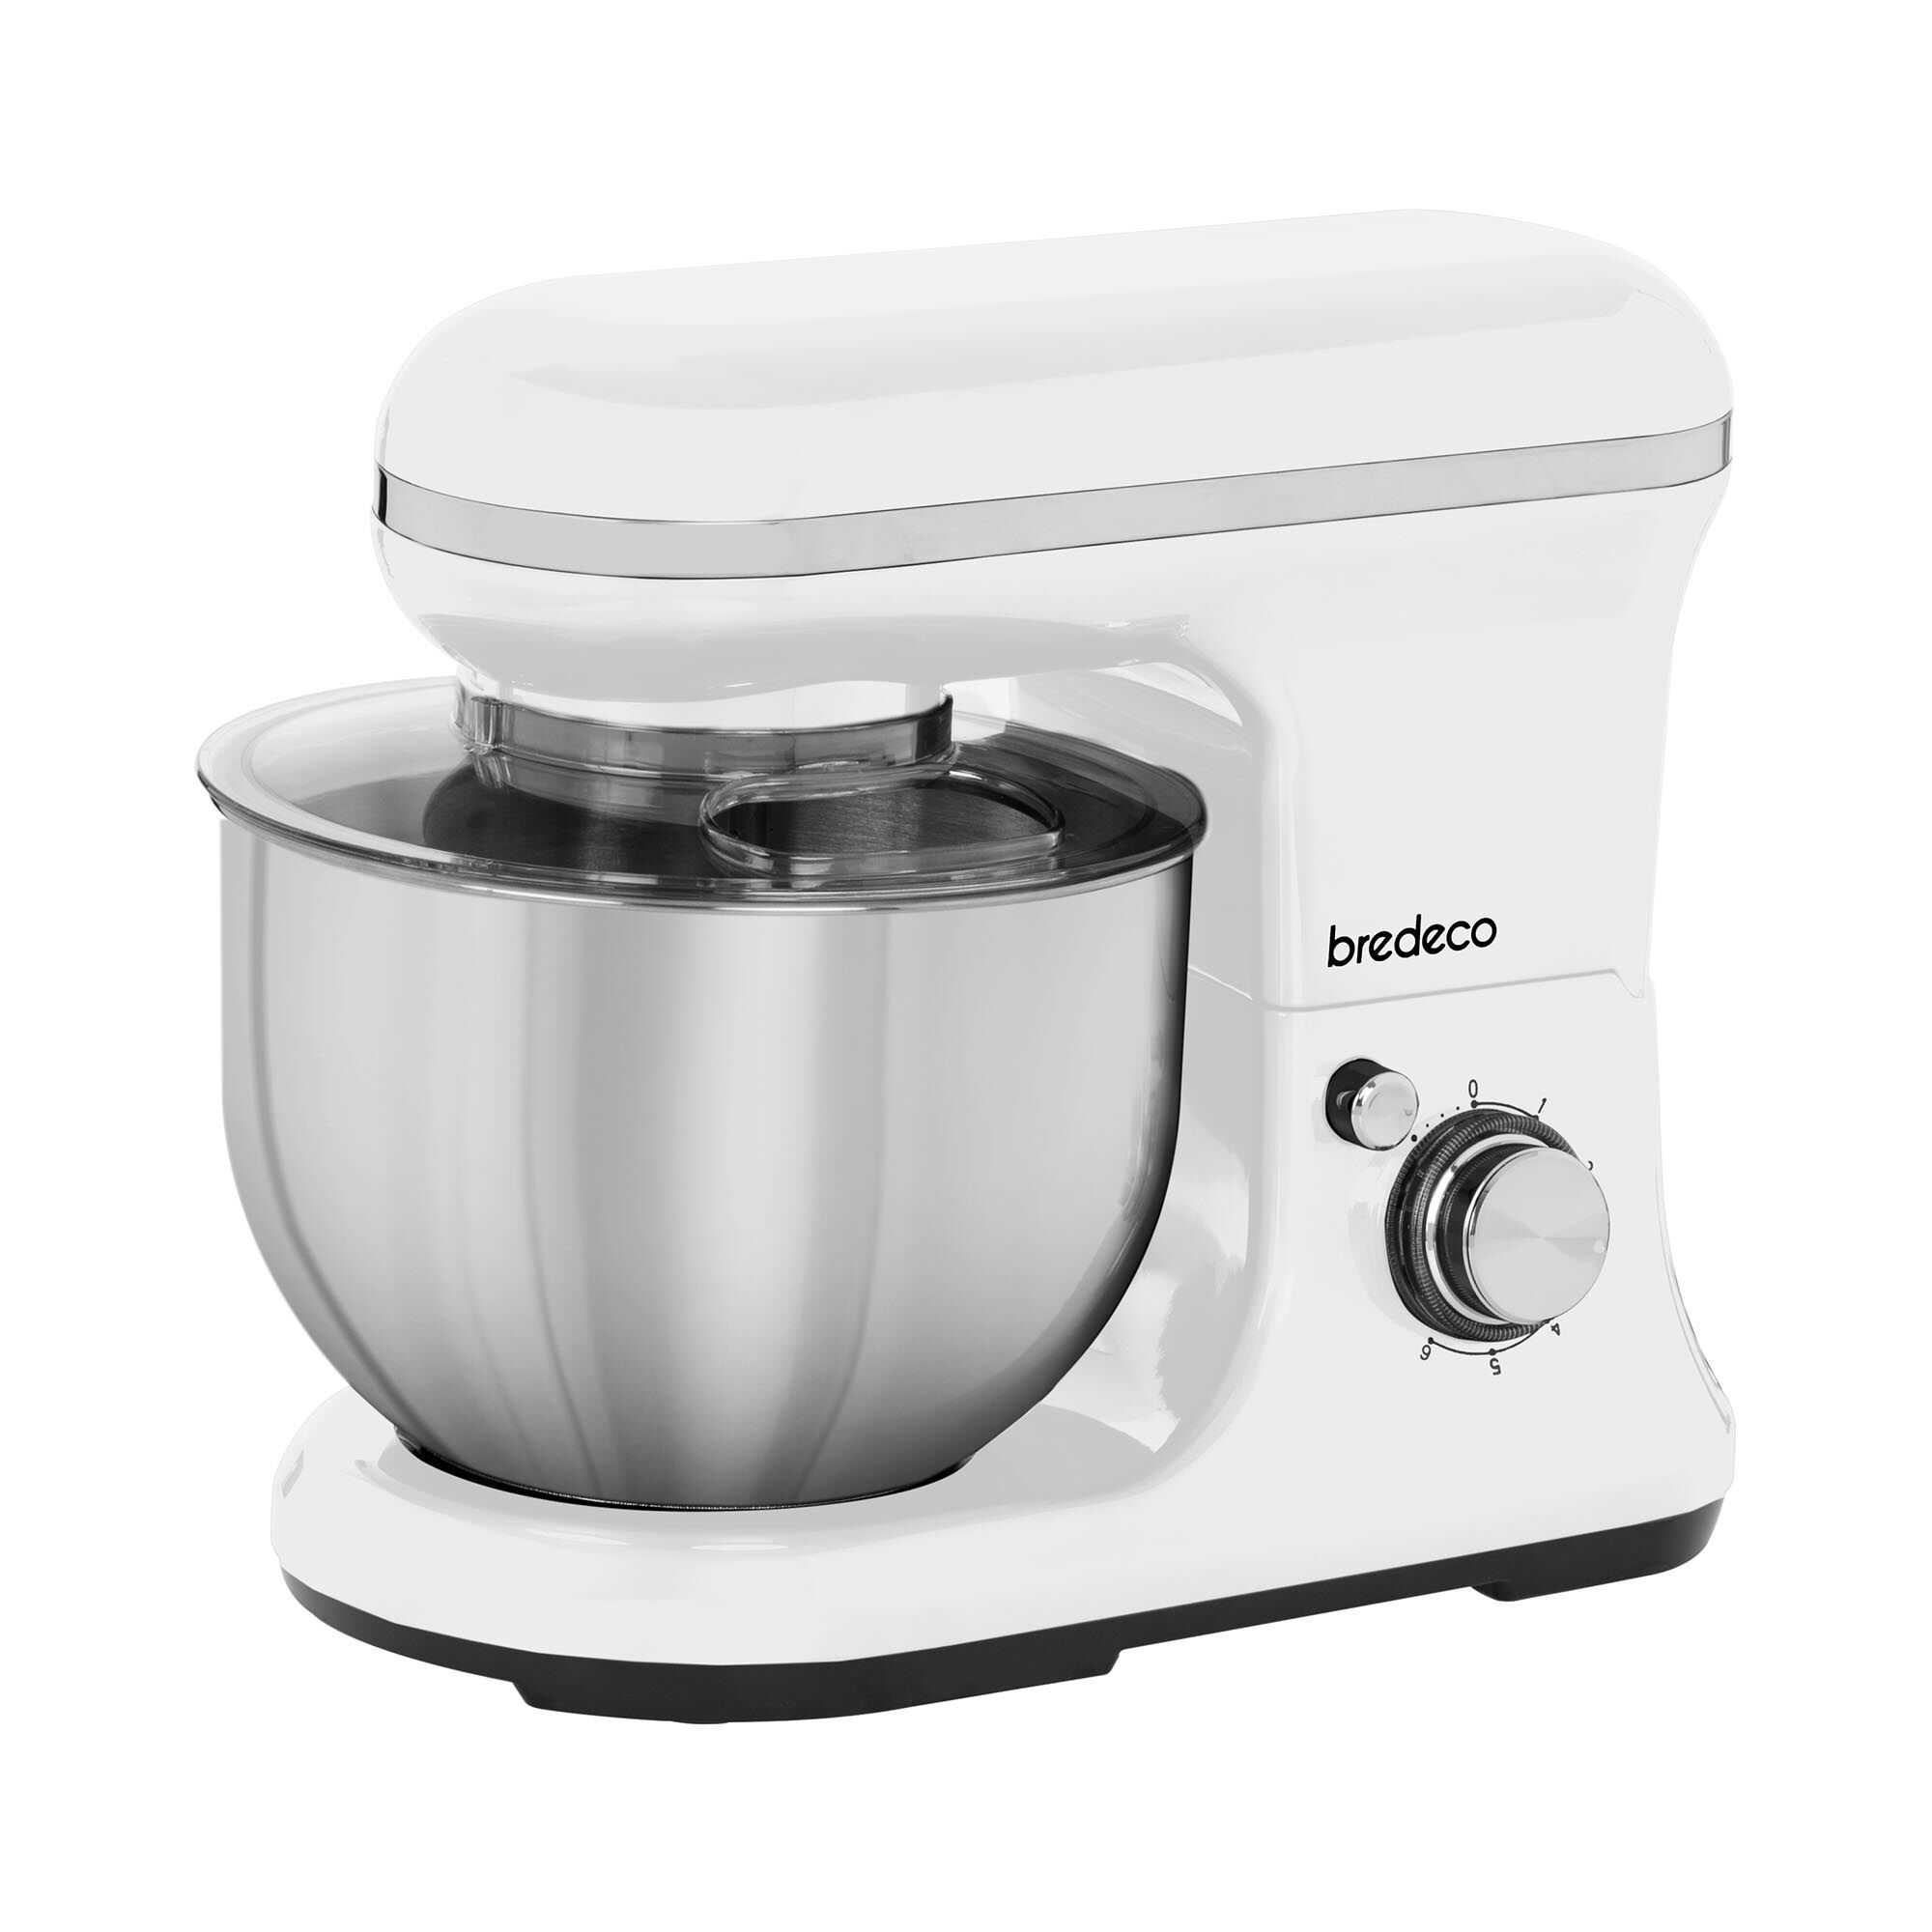 bredeco Stand Mixer 1,200 W - planetary mixer - 5 L - silver BCPM-1200S